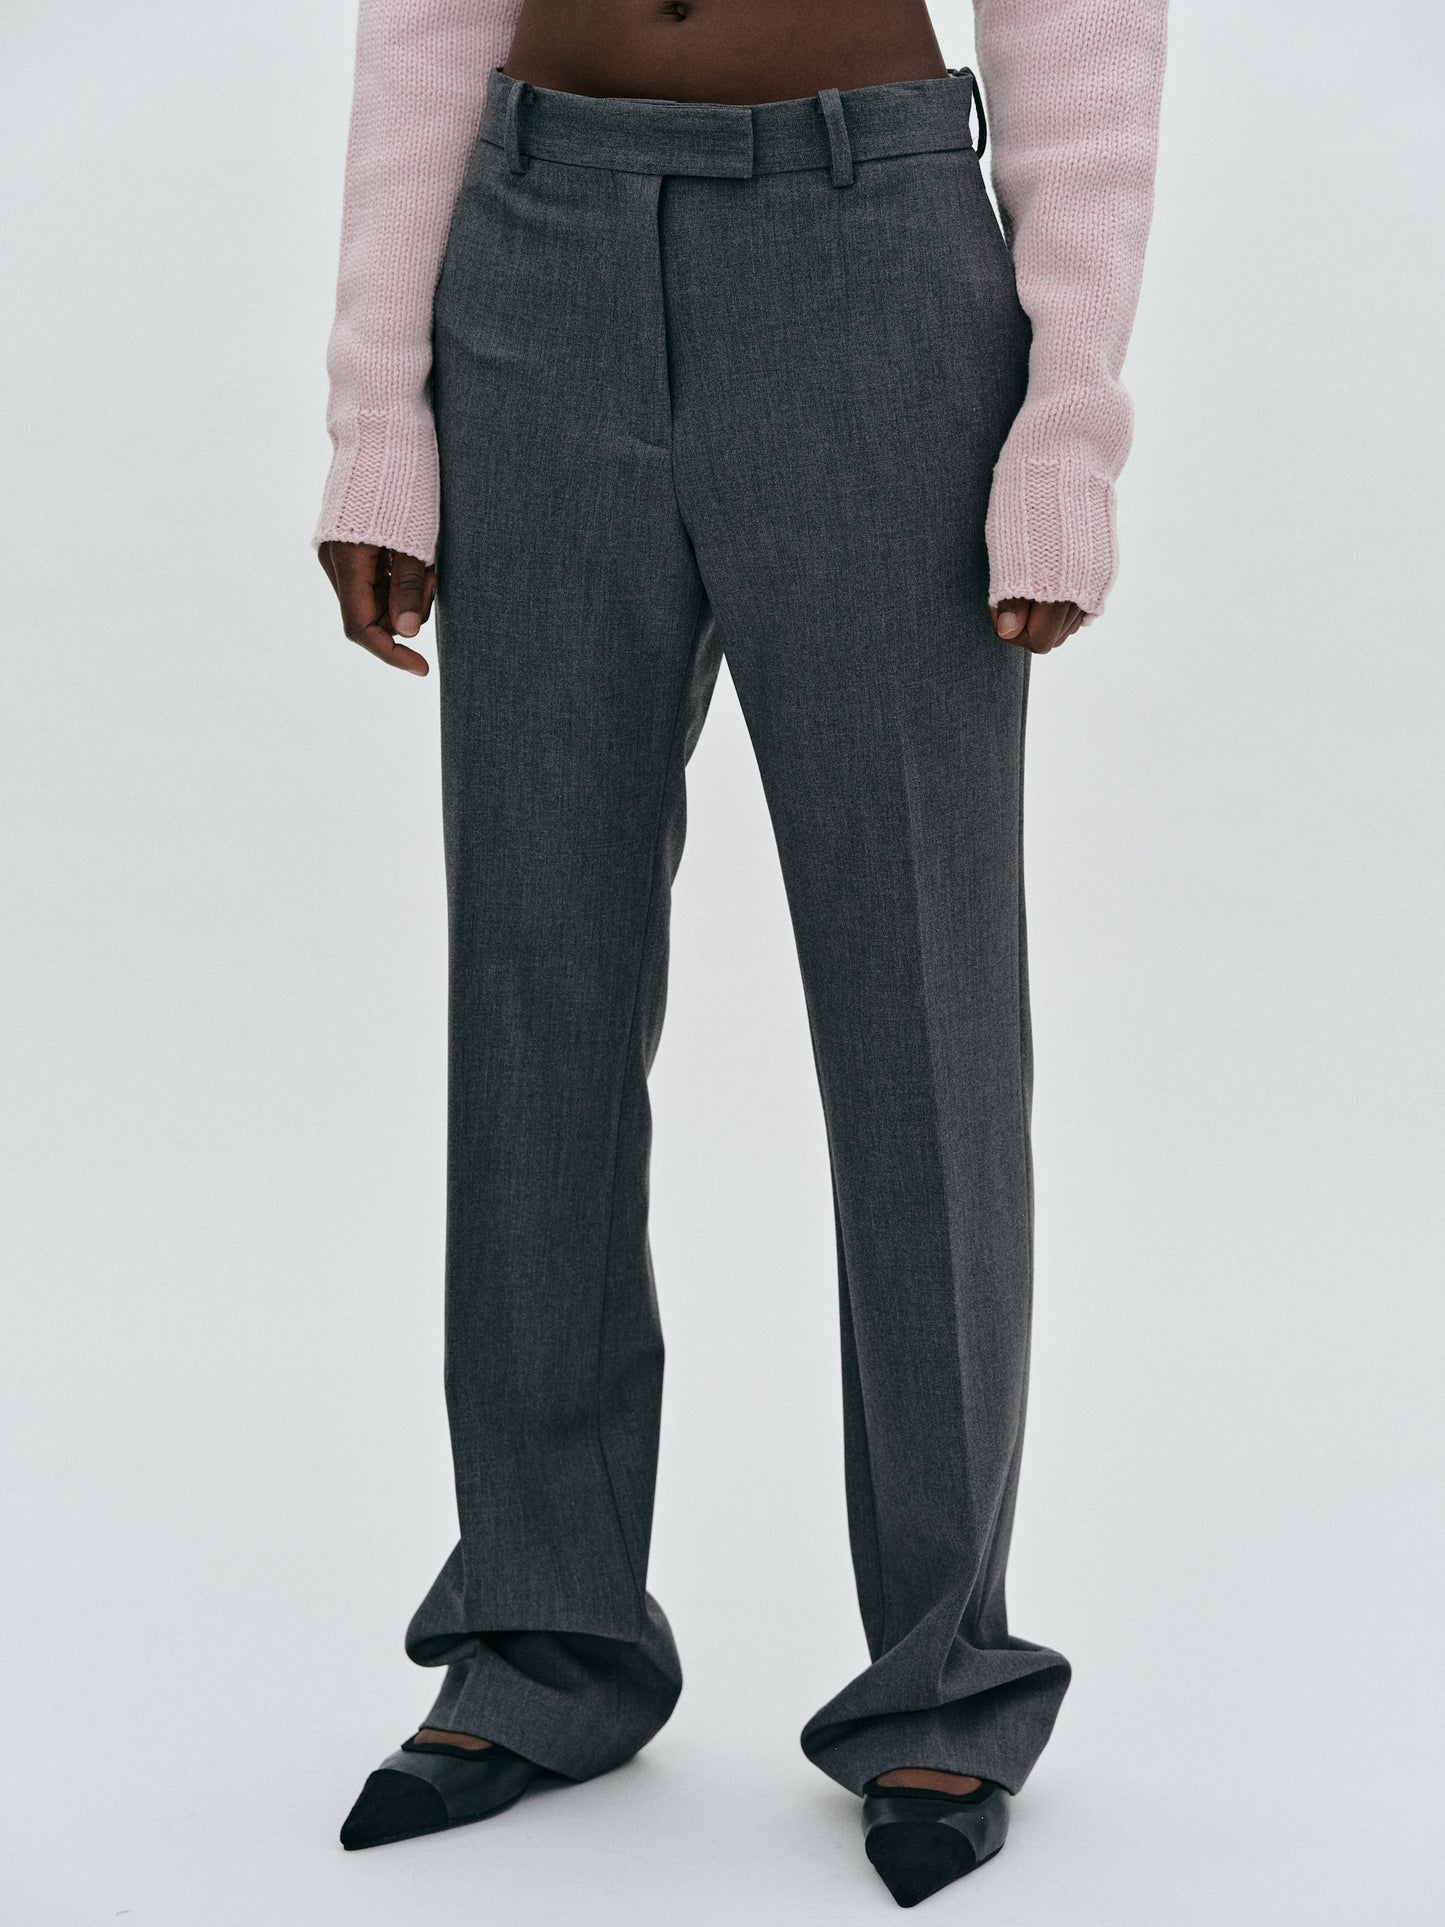 Full-Length Suit Trousers, Charcoal Grey